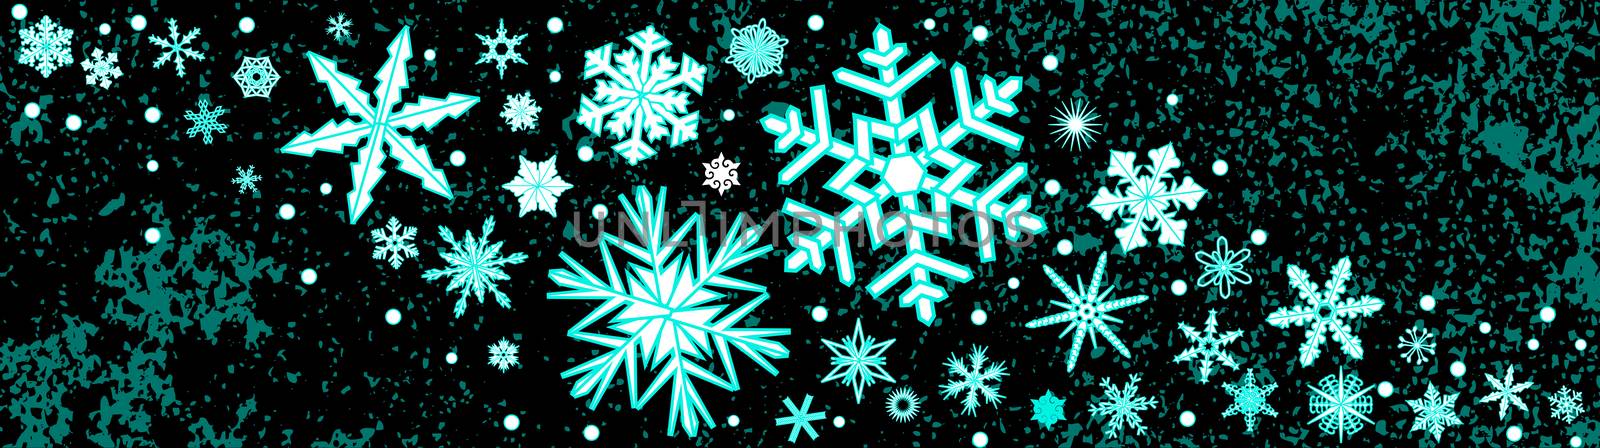 Christmas snowflake banner in white and ice blue isolated on a black background